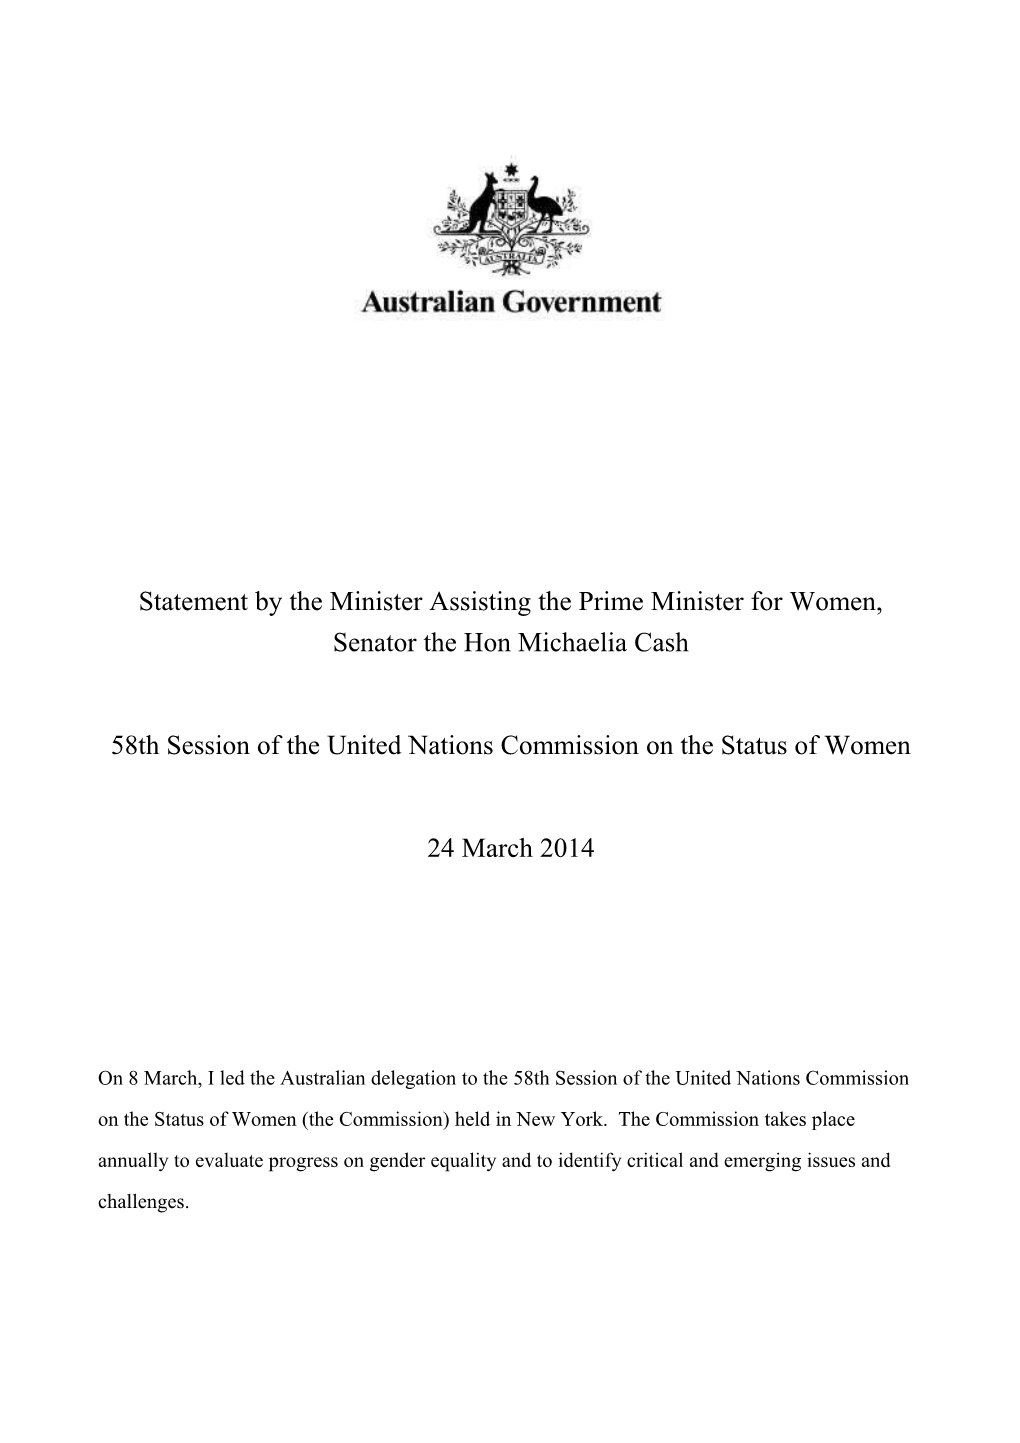 58Th Session of the United Nations Commission on the Status of Women